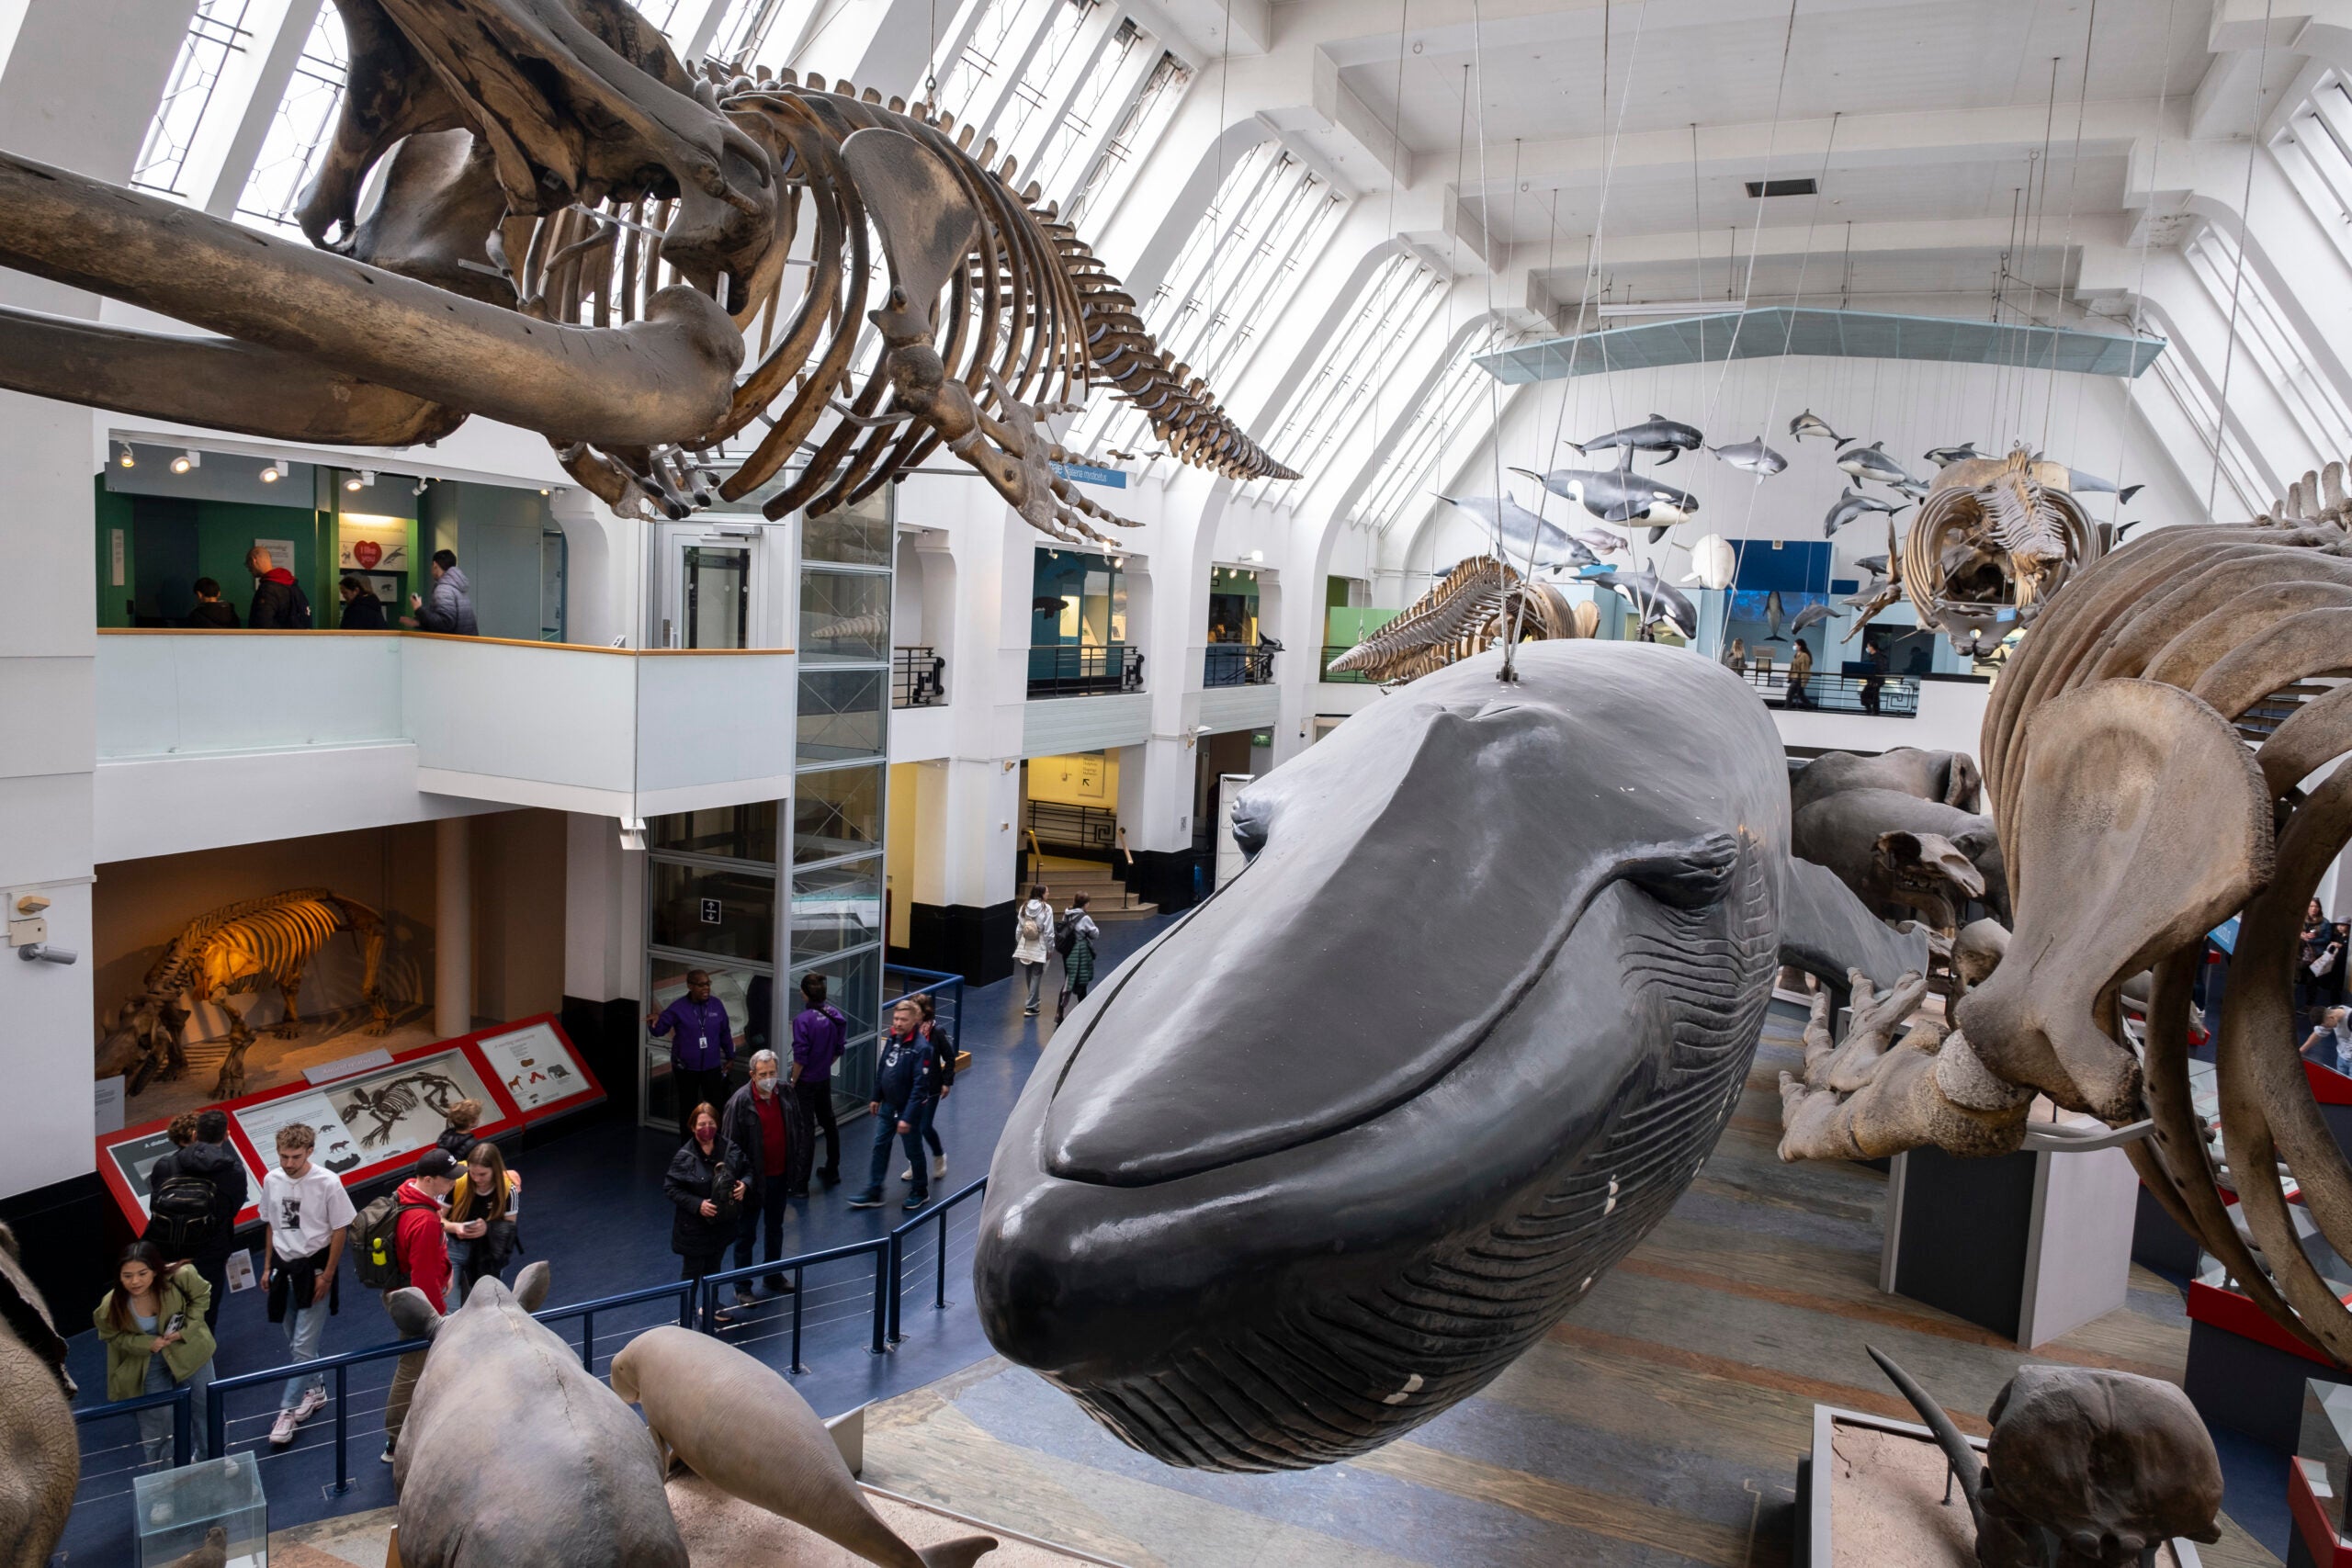 Inside the Natural History Museum.